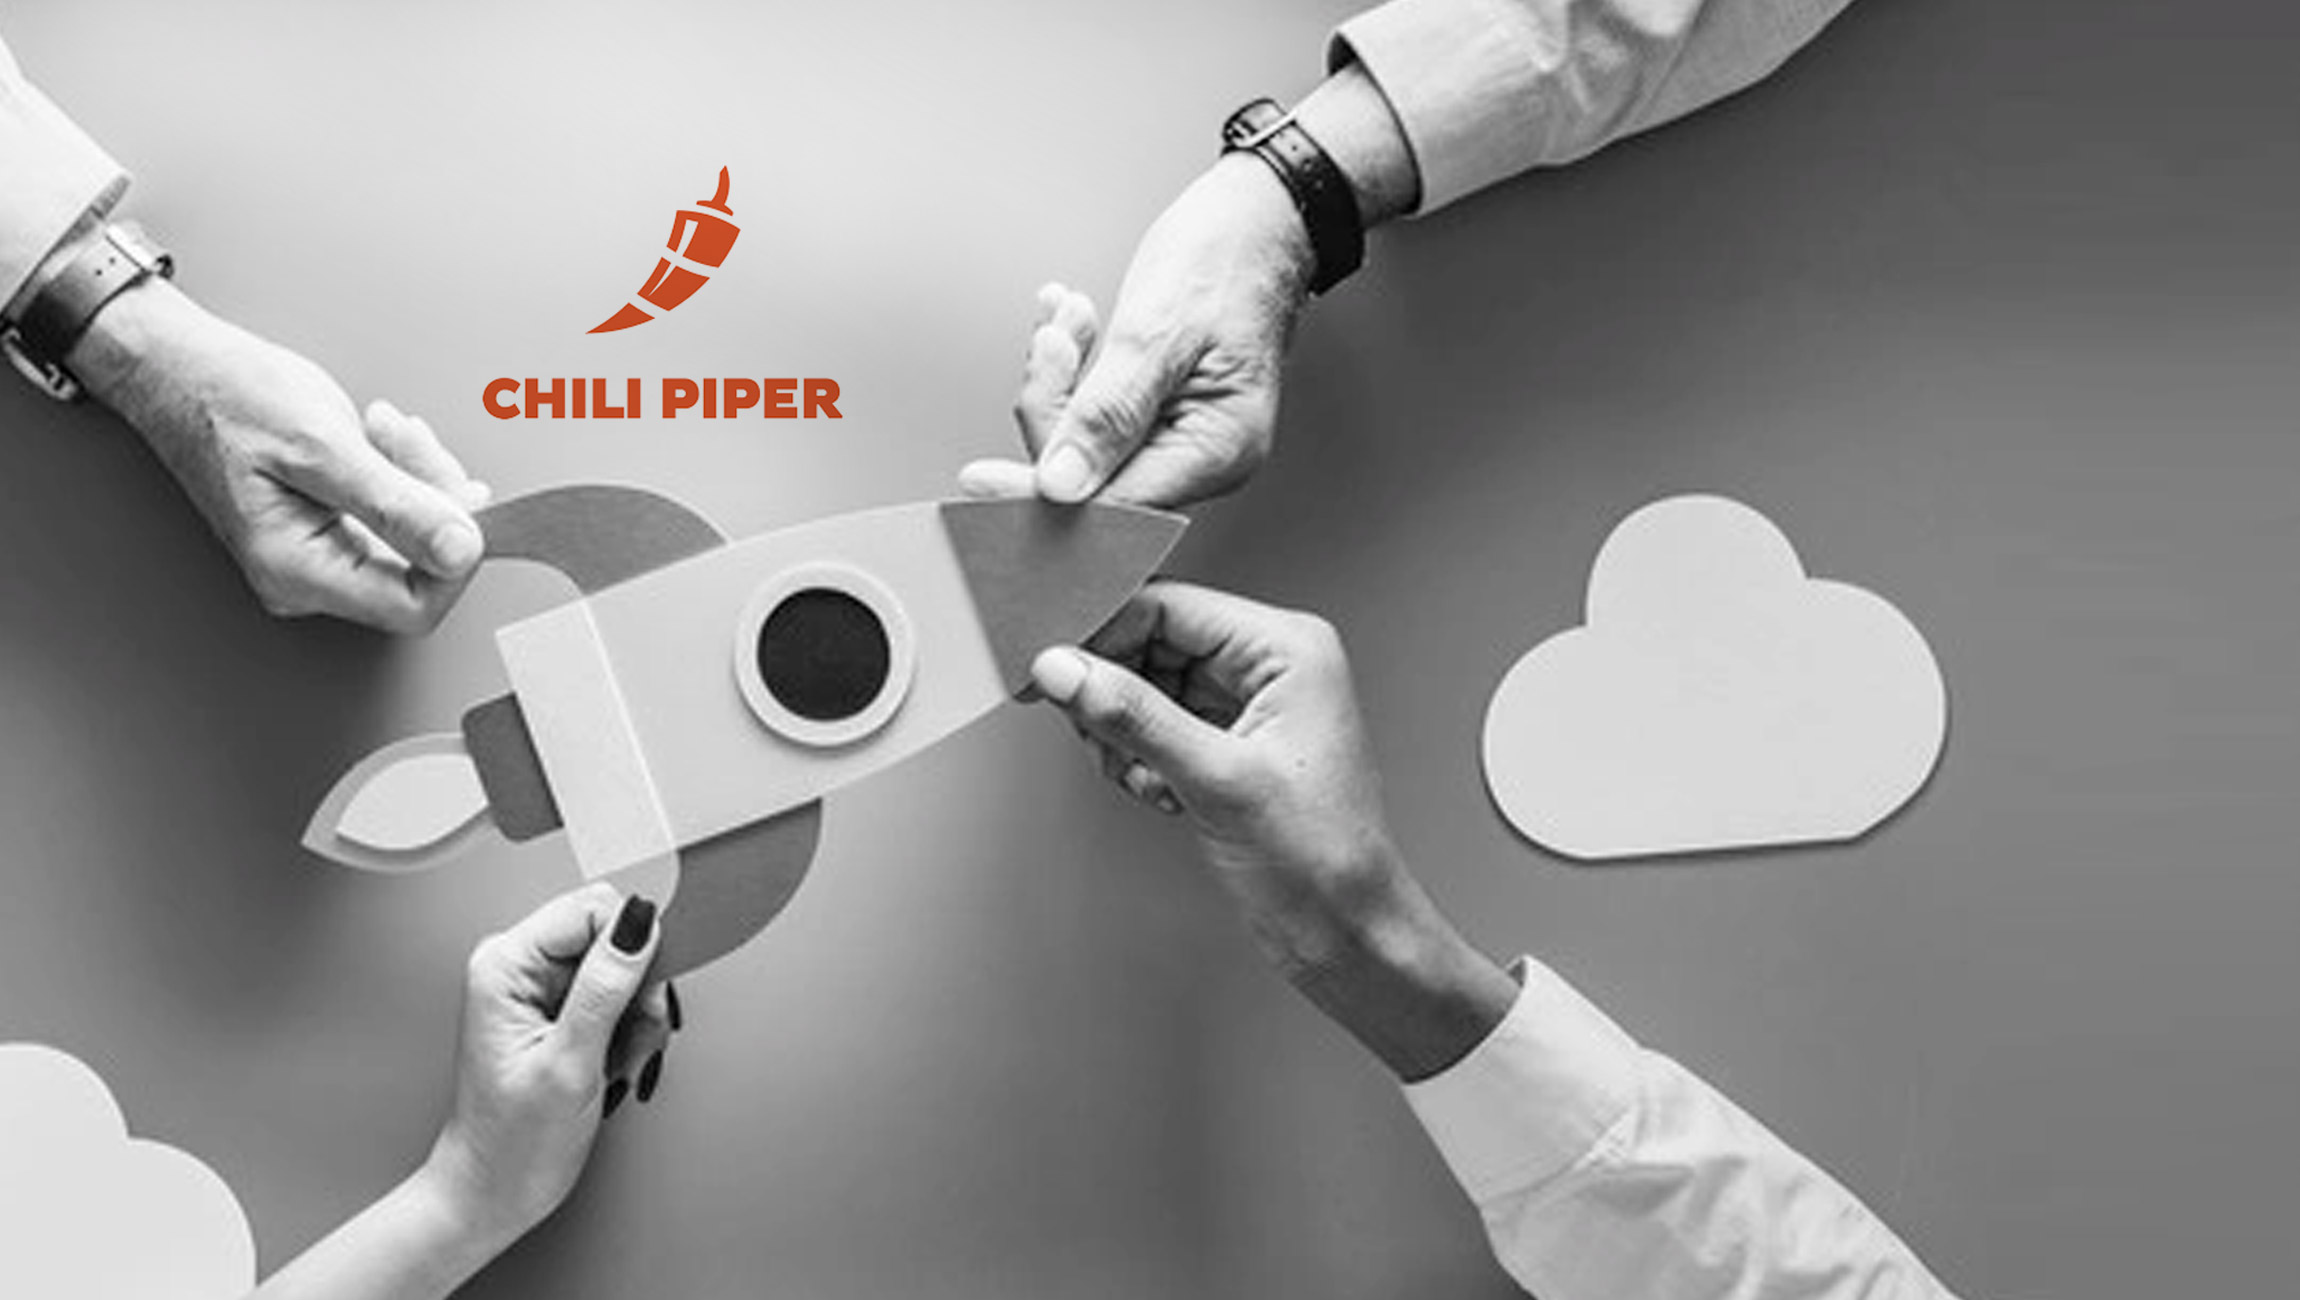 Chili Piper Launches Distro to Route Inbound Leads in Real-time and Increase Inbound Conversion Rates and Revenue